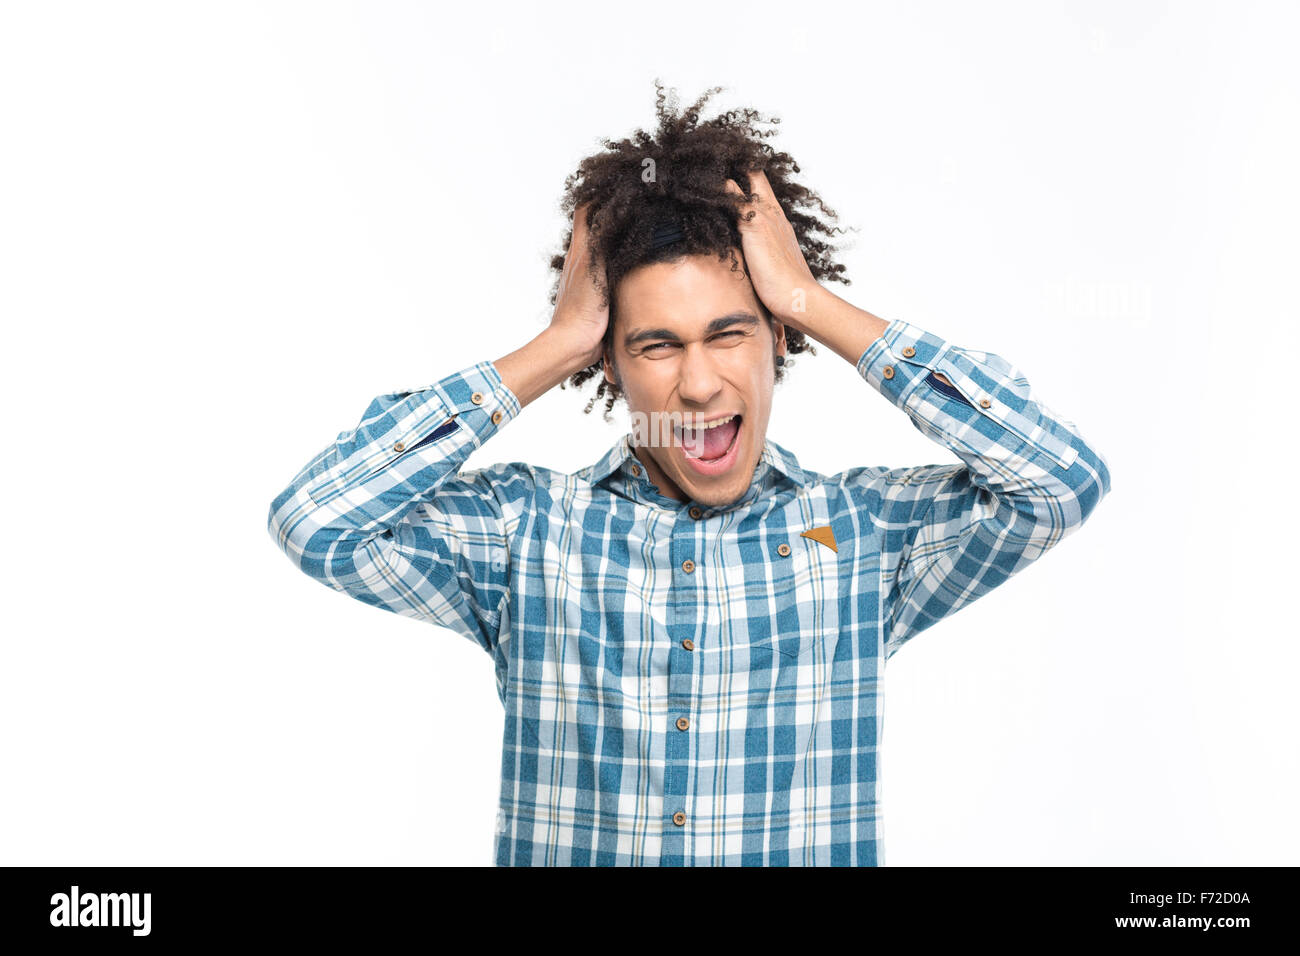 Portrait of a stressed afro american man with curly hair screaming isolated on a white background Stock Photo